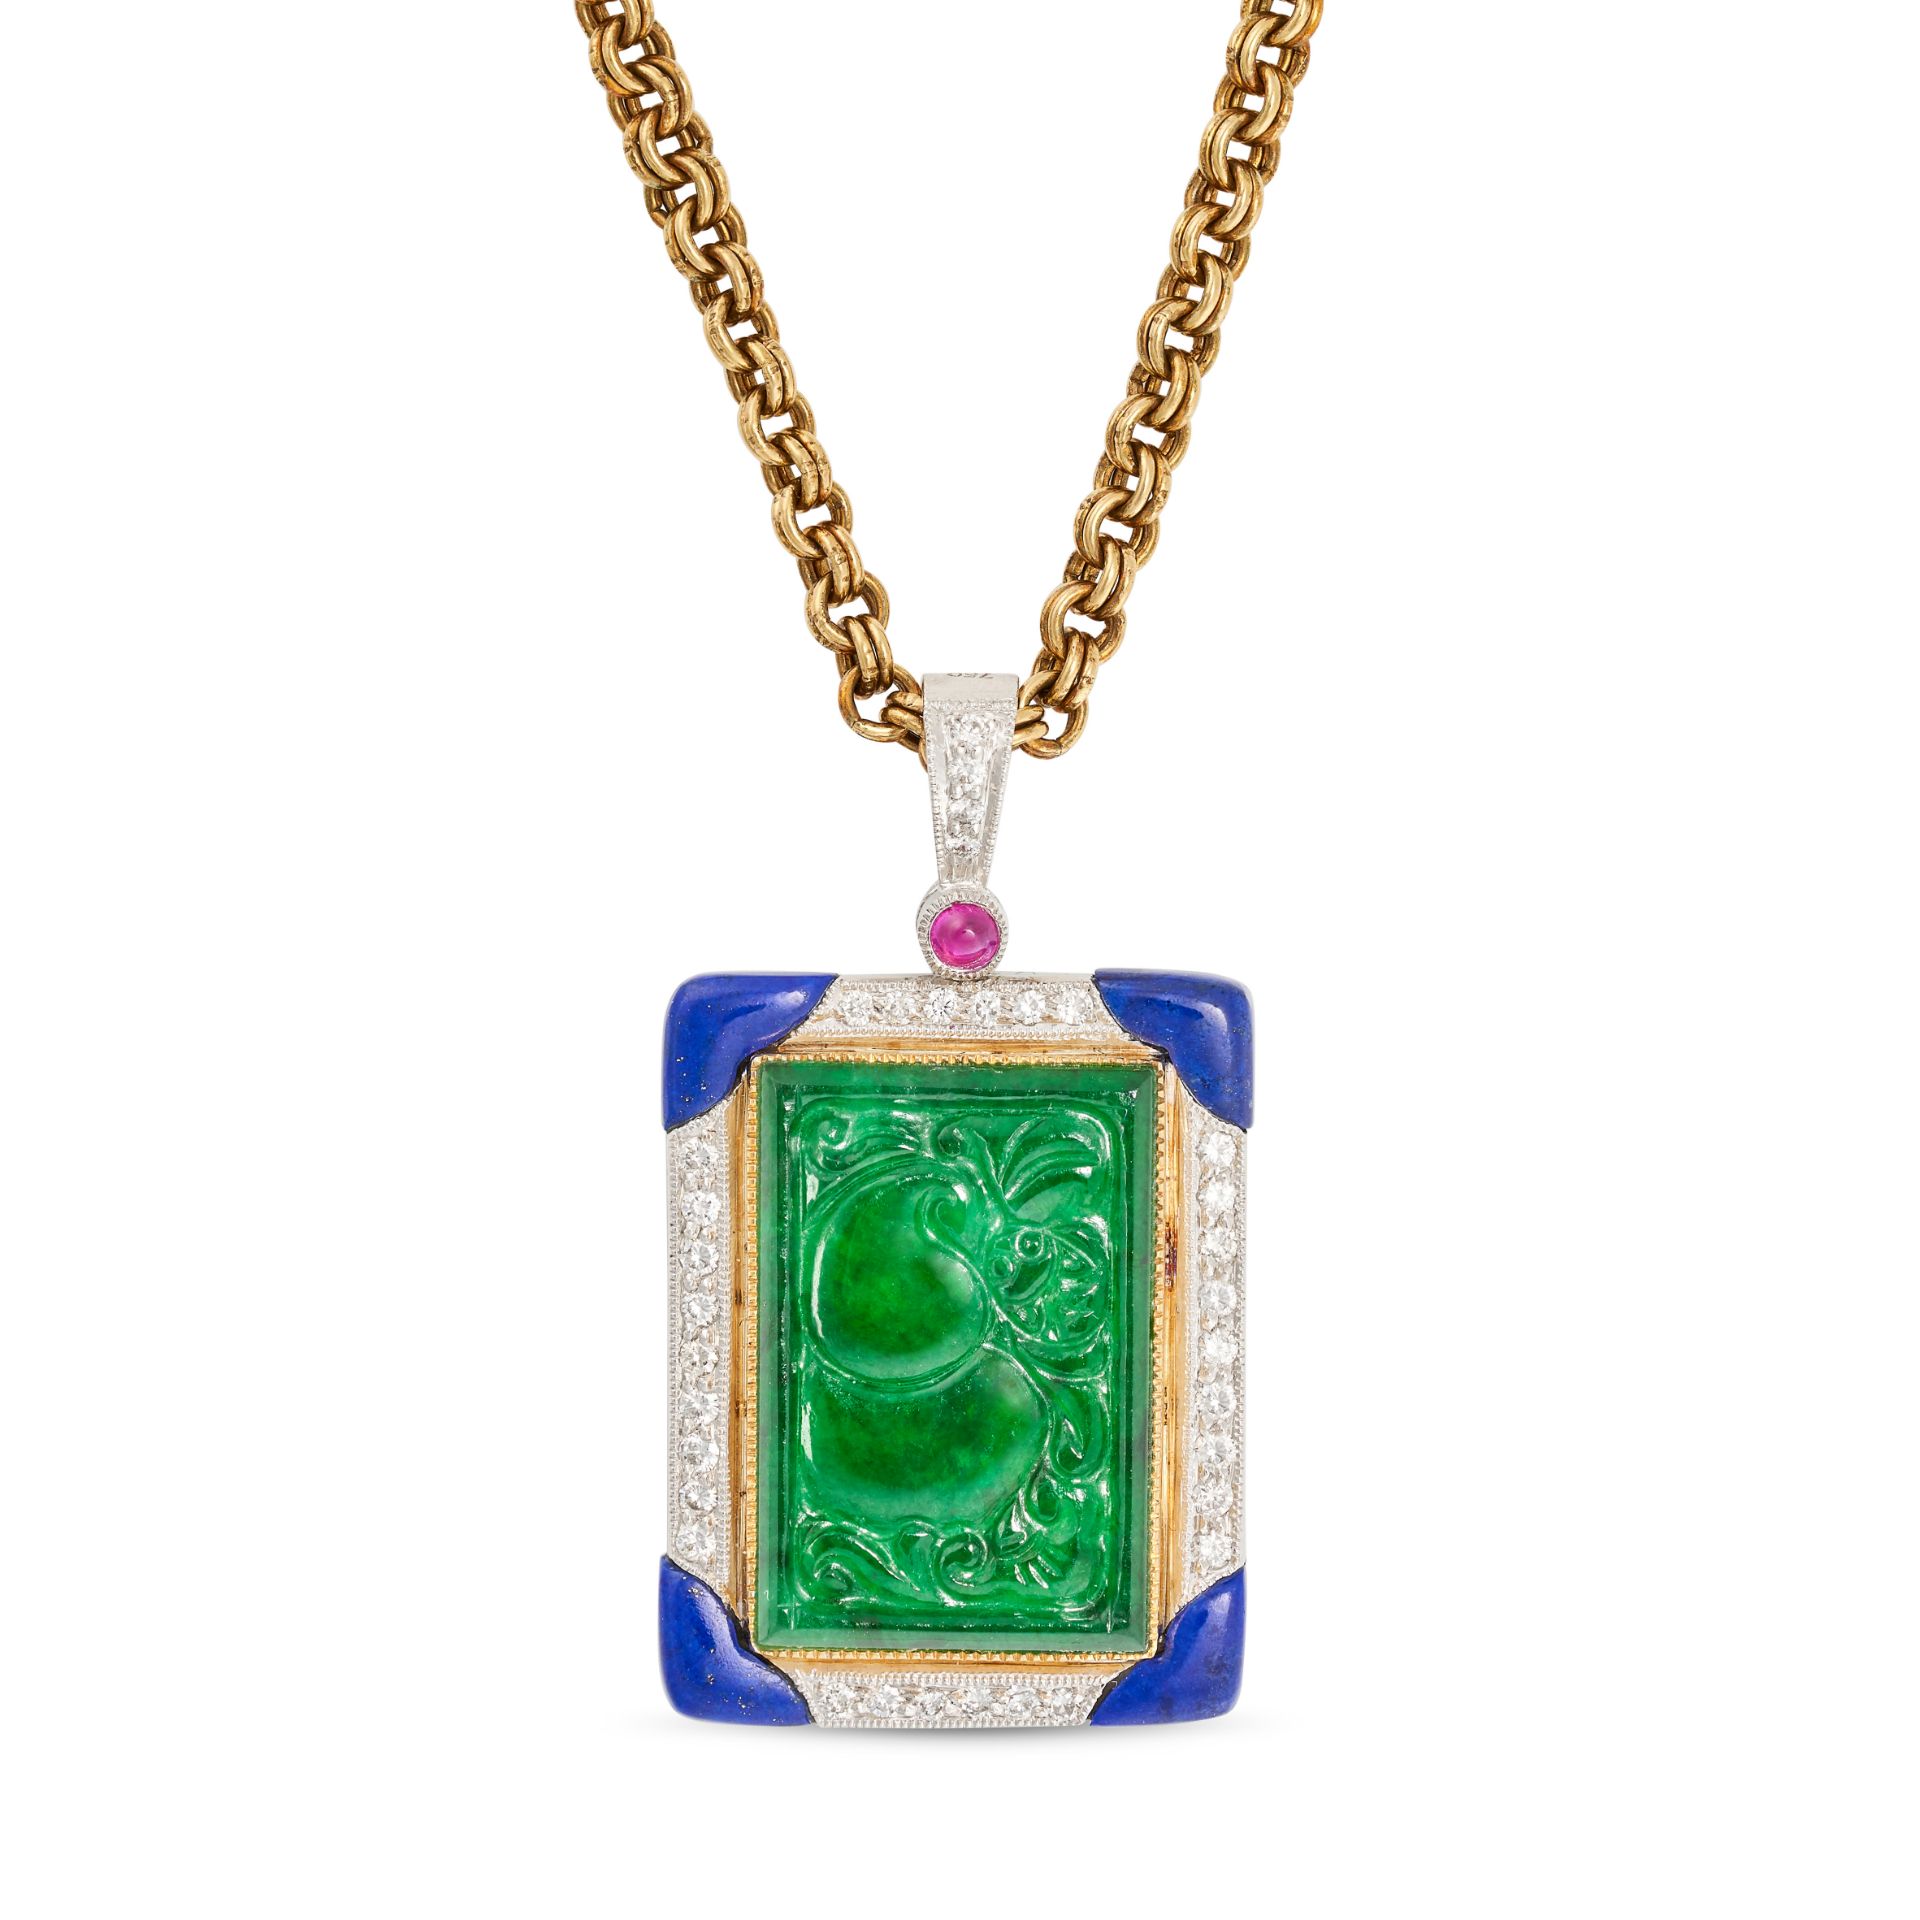 AN UNTREATED JADEITE JADE, LAPIS LAZULI, DIAMOND AND RUBY PENDANT NECKLACE in yellow and white go...